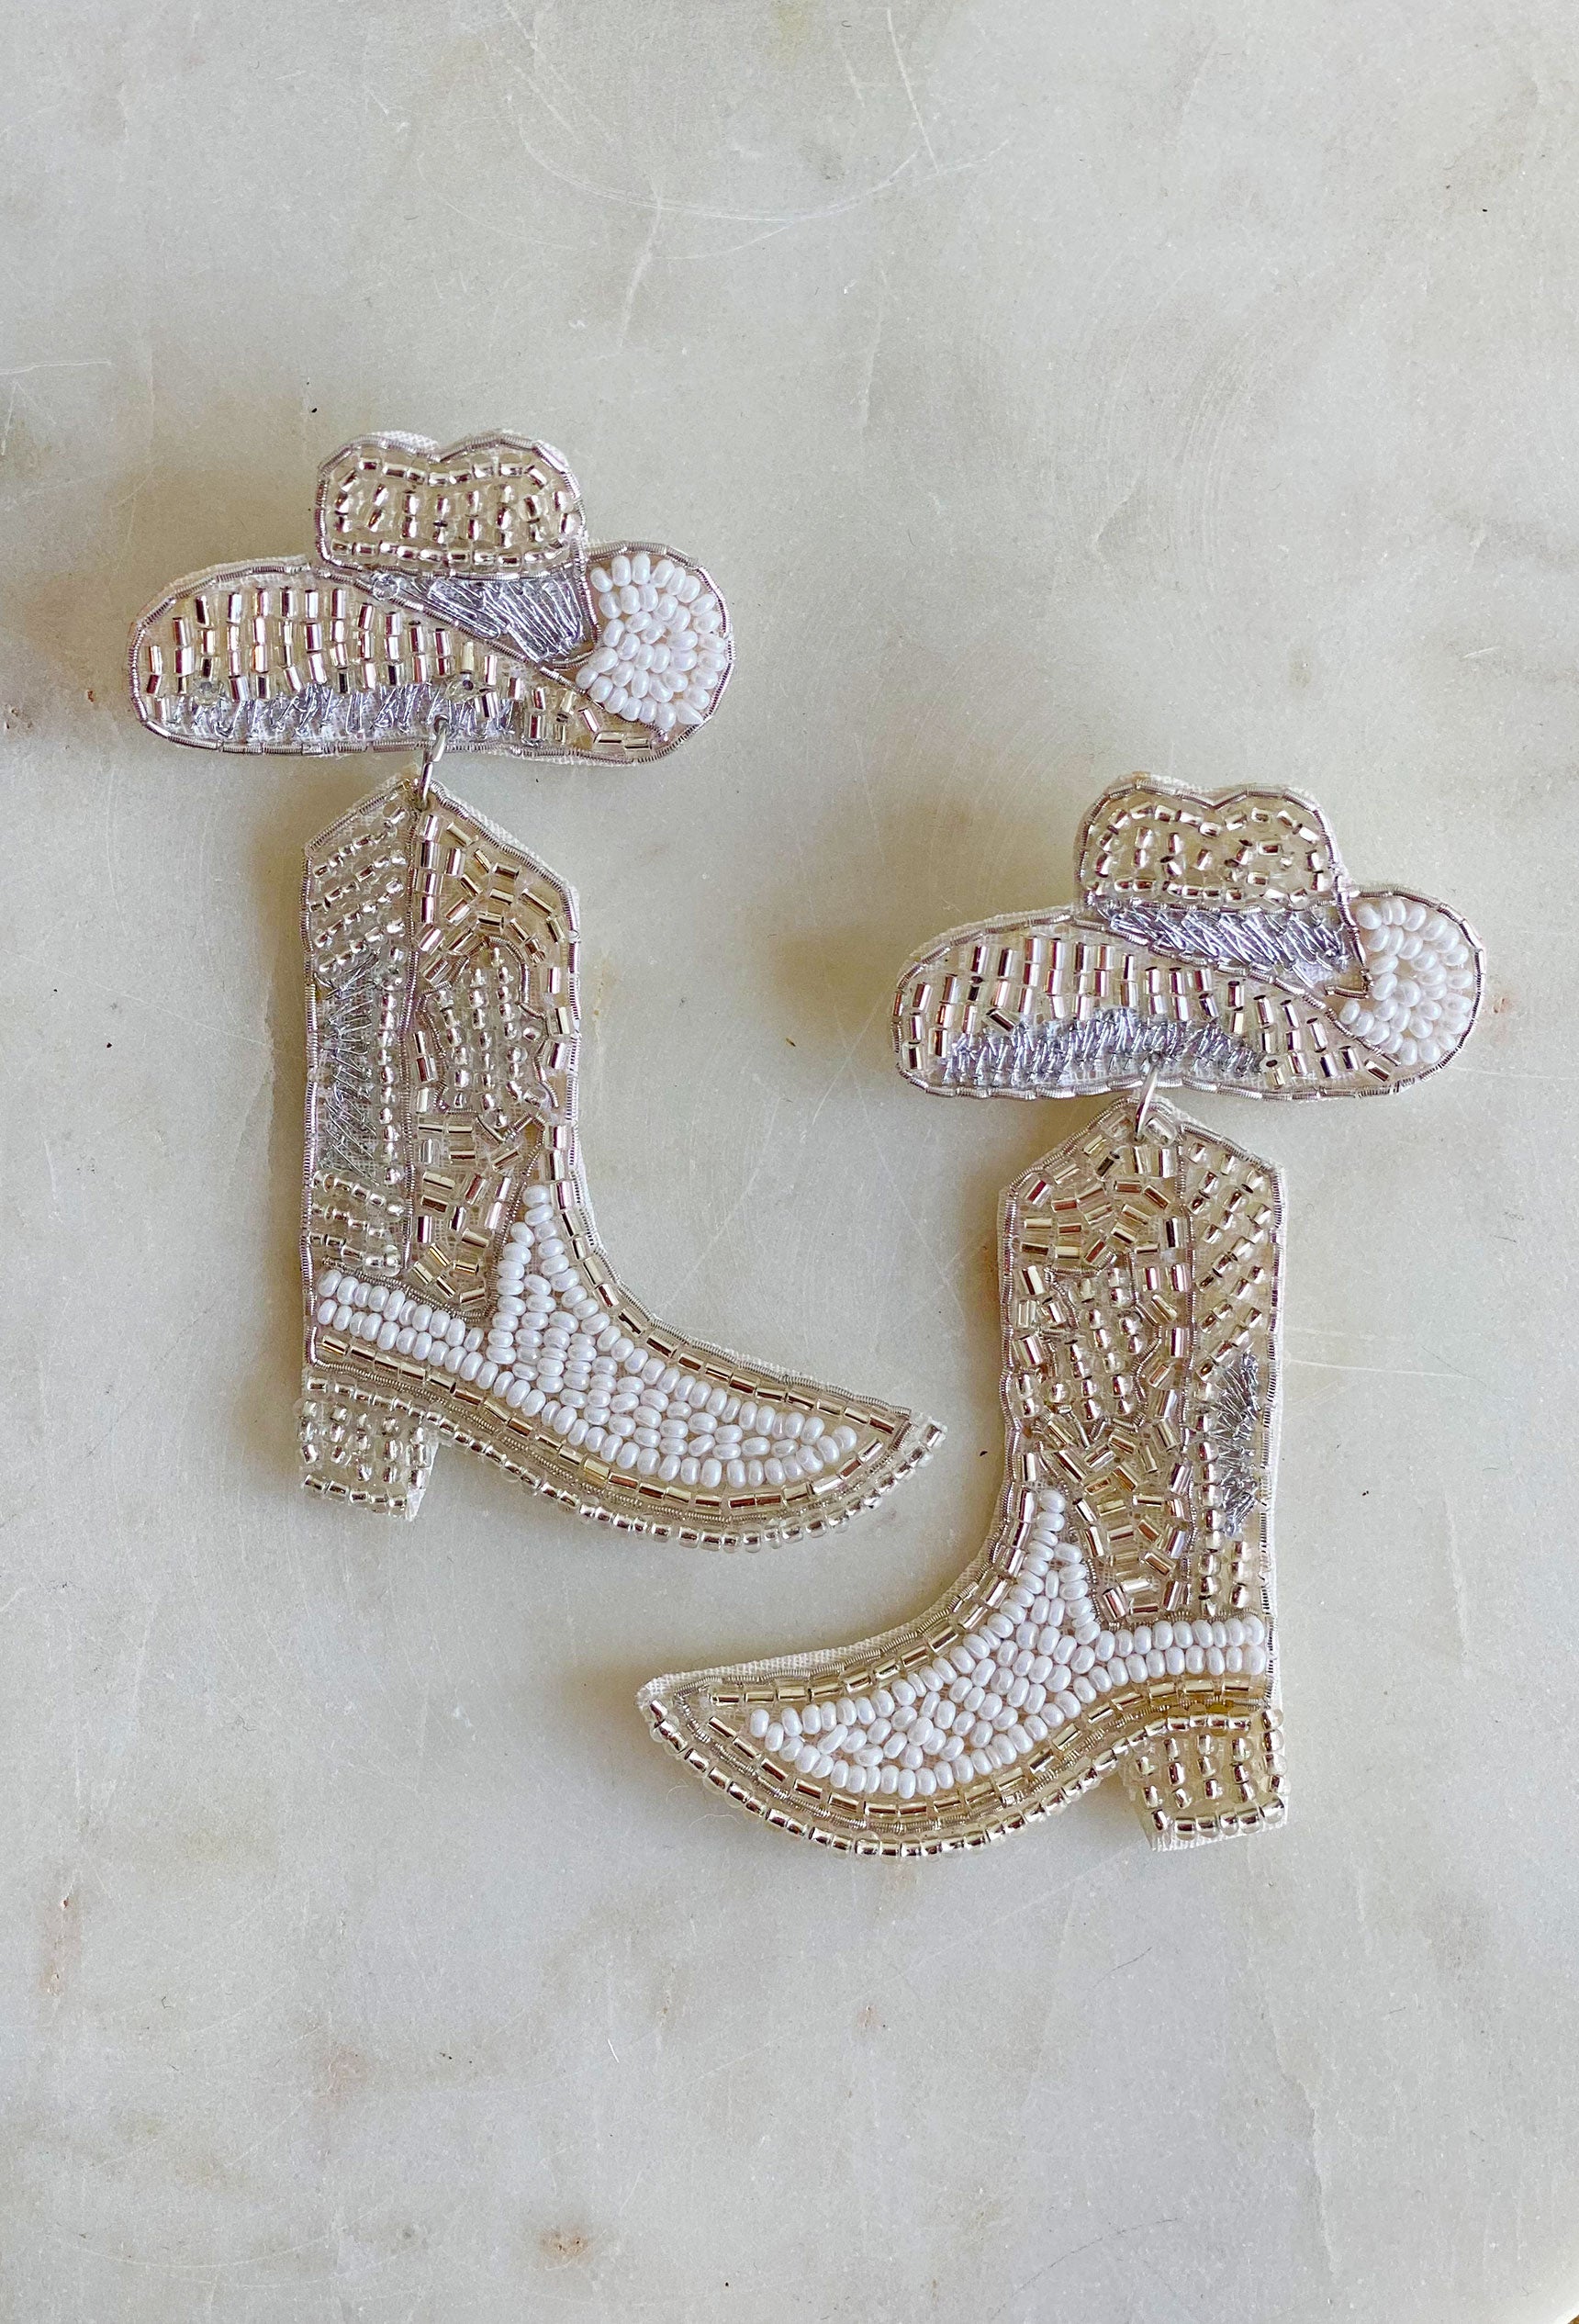 Austin Outing Beaded Boot Earrings, white beads and silver details for a touch of sparkle, cowboy hat, and a boot silhouette